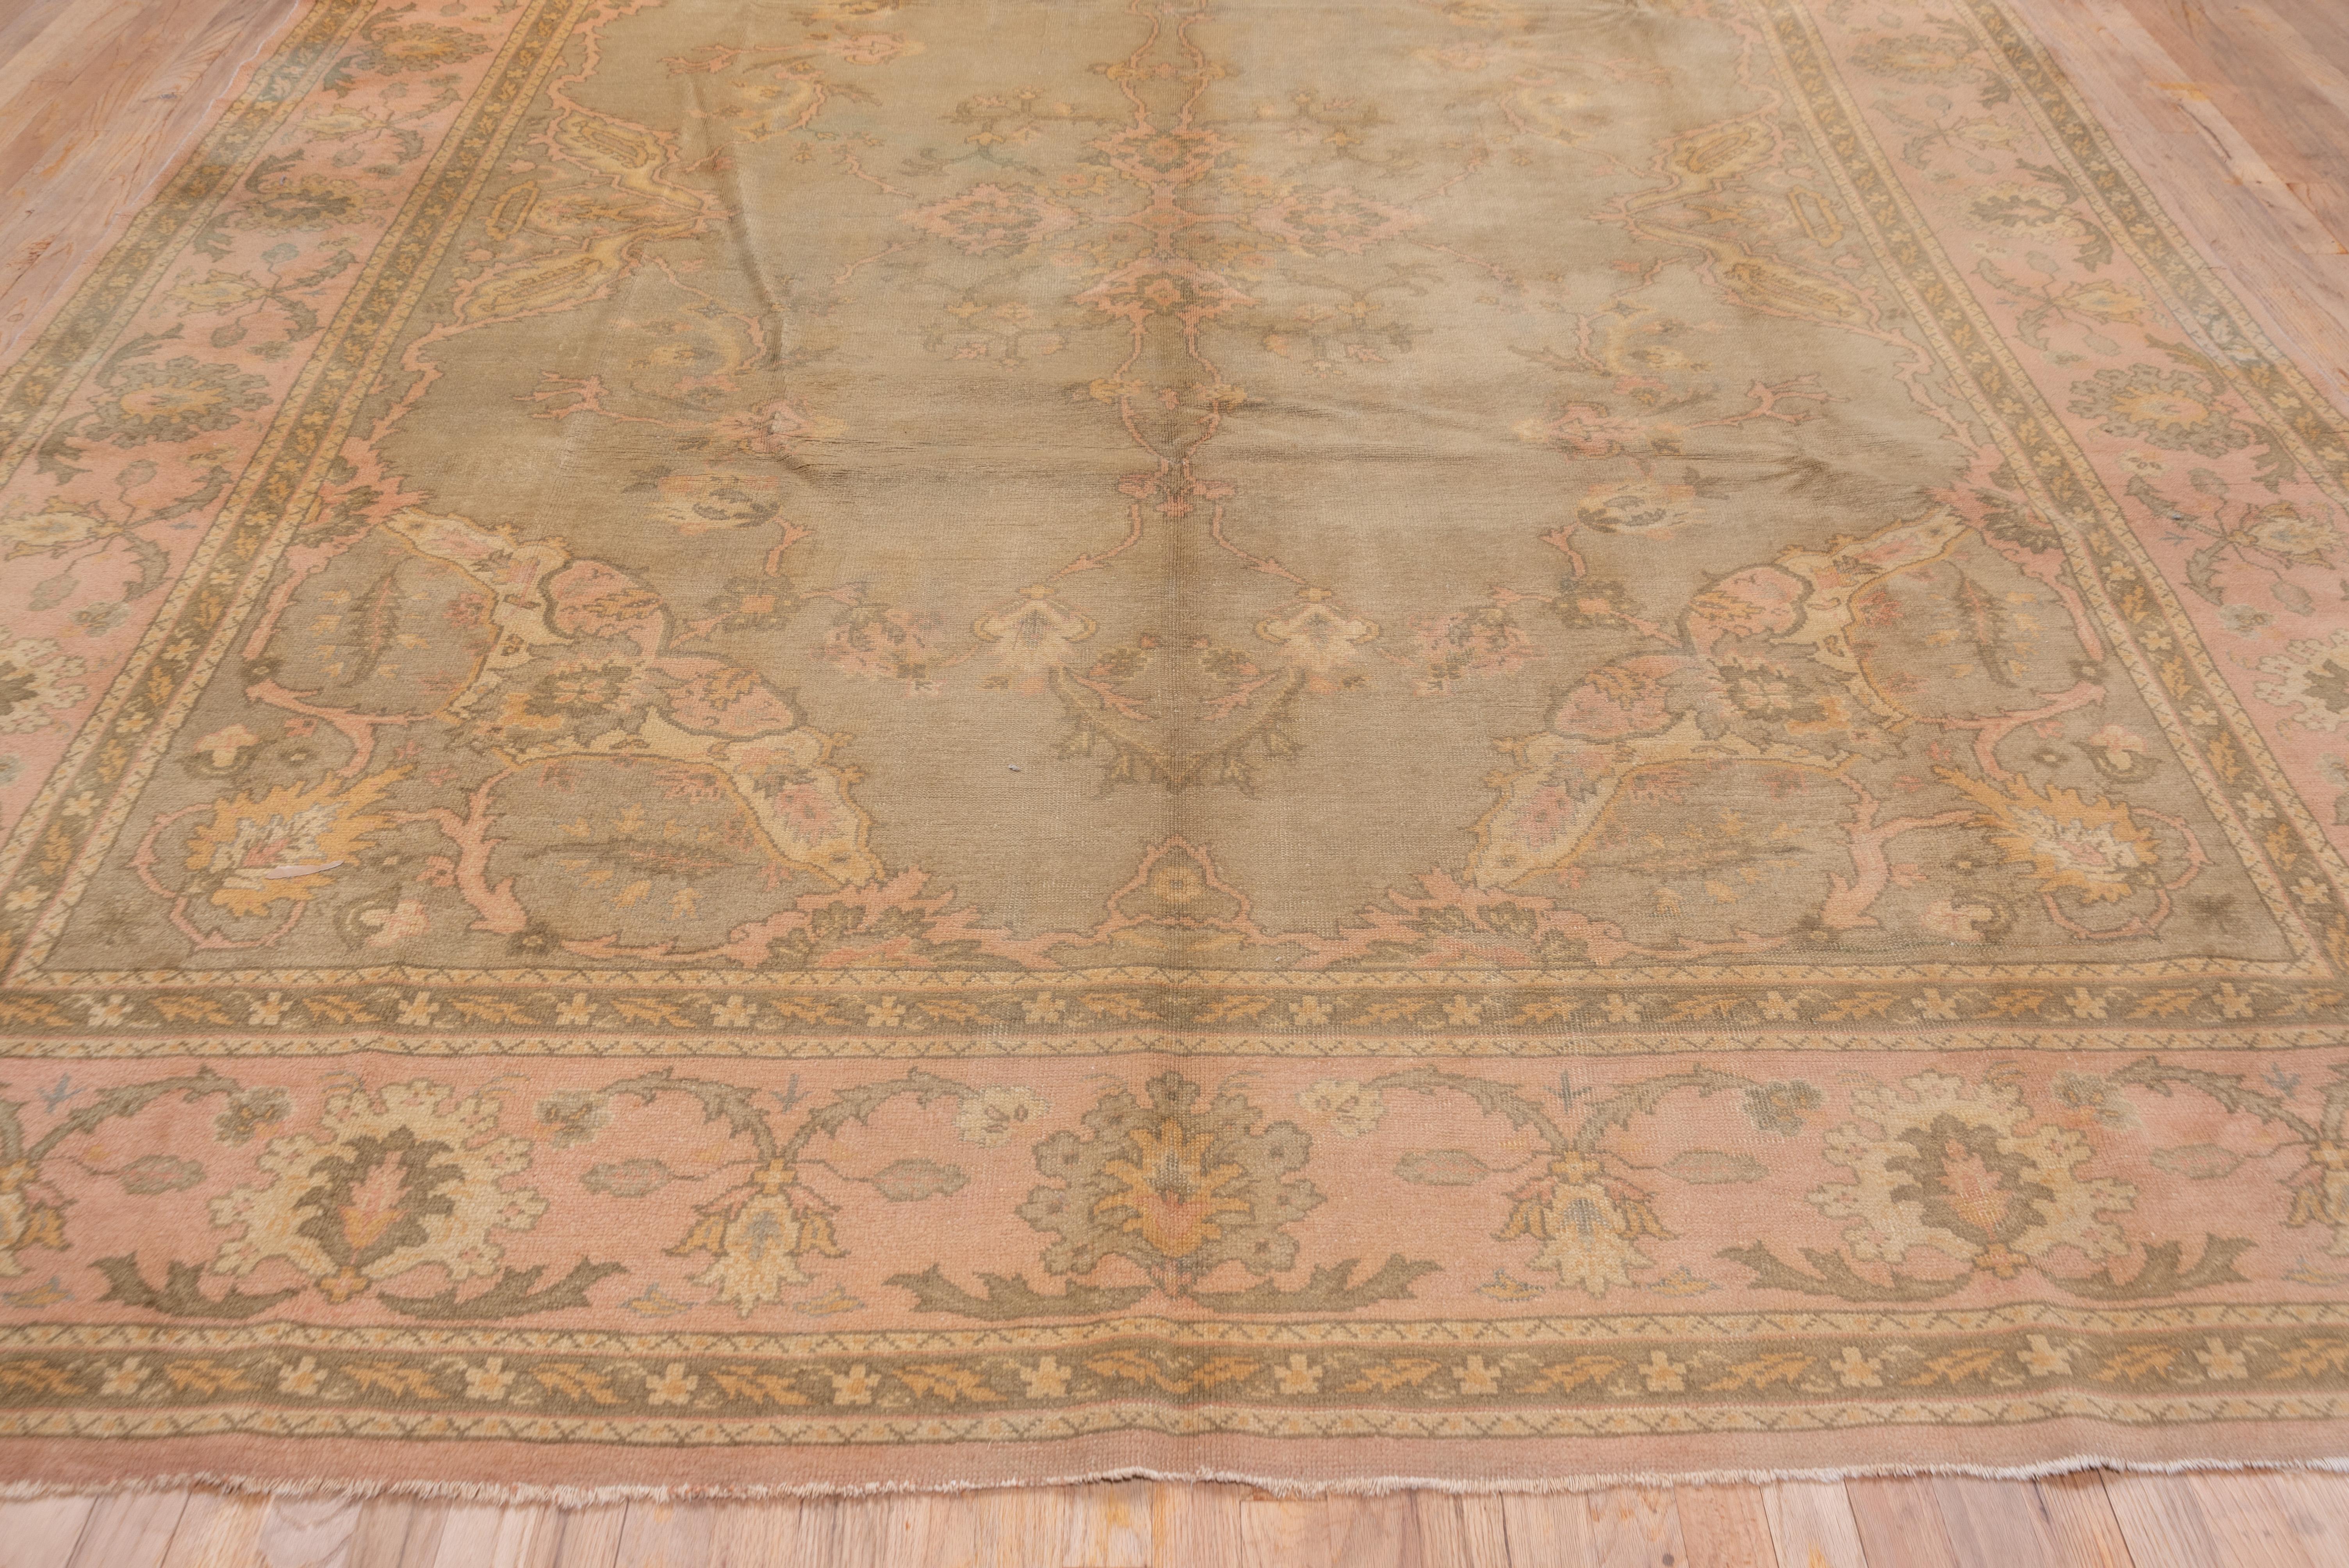 Early 20th Century Antique Turkish Oushak Rug, Sage Green Field, Light Pink Borders, circa 1920s For Sale